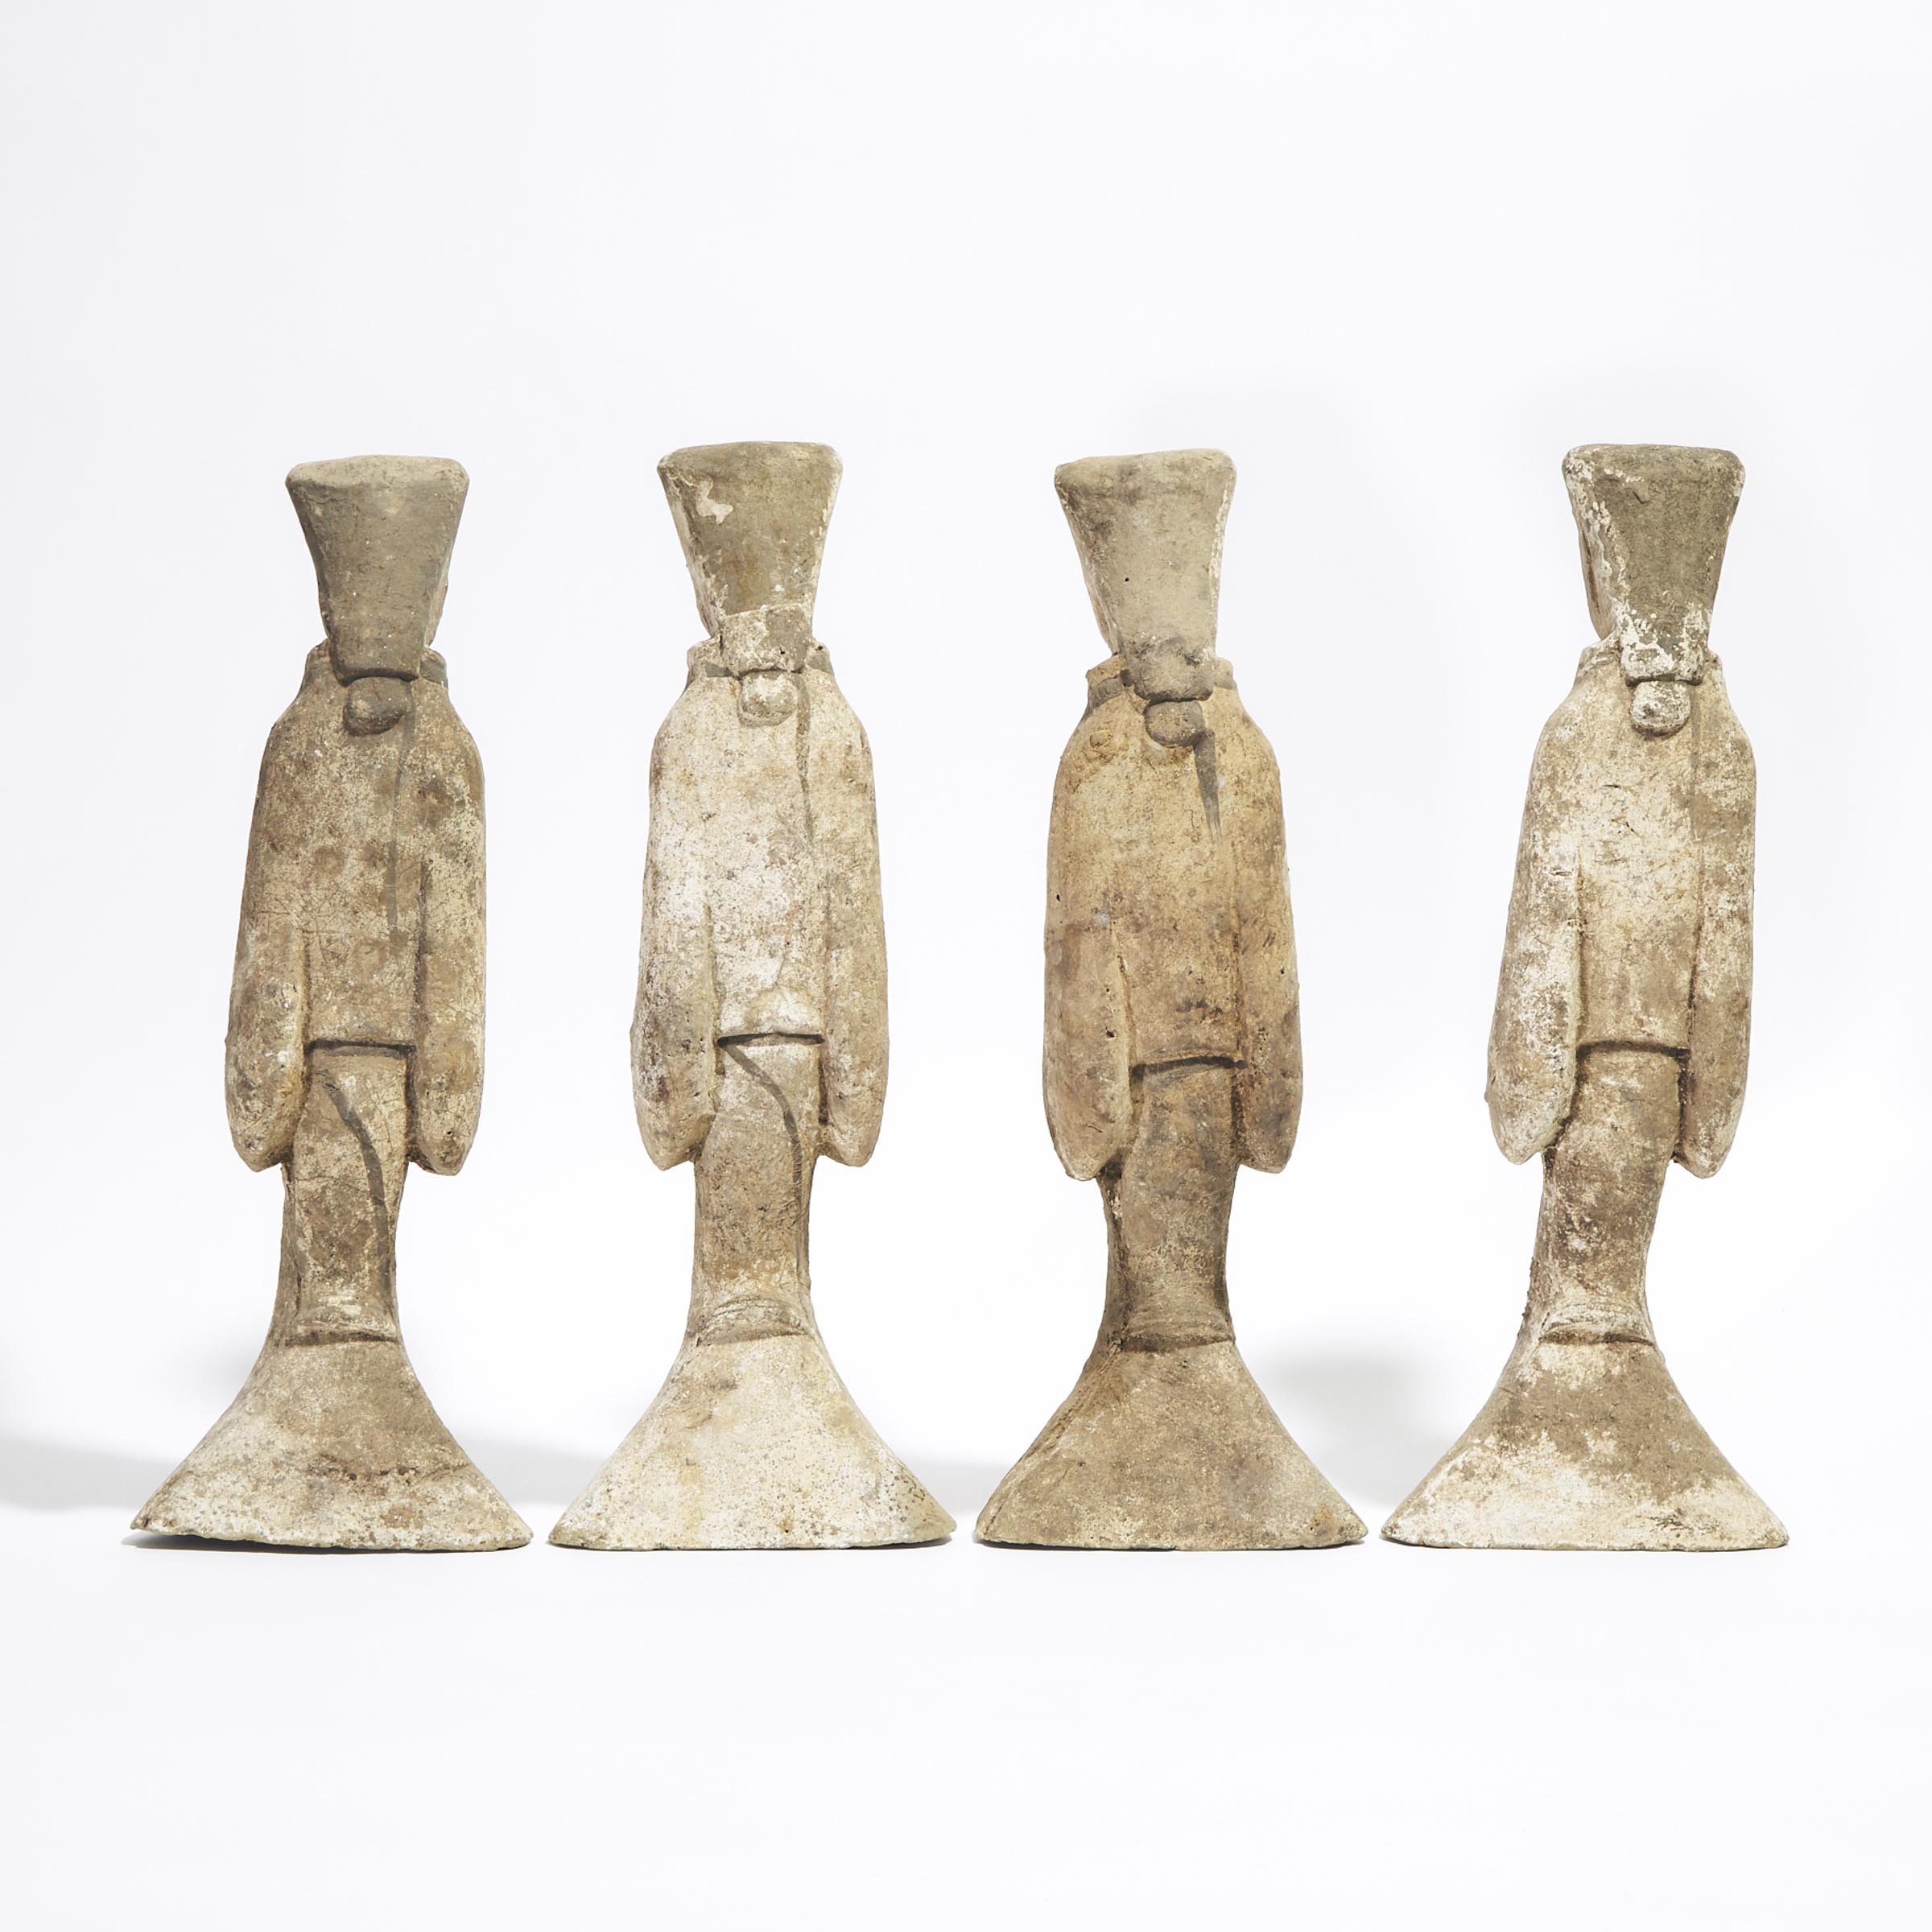 A Group of Four Large Painted Pottery Figures of Attendants, Han Dynasty (206 BC - AD 220)